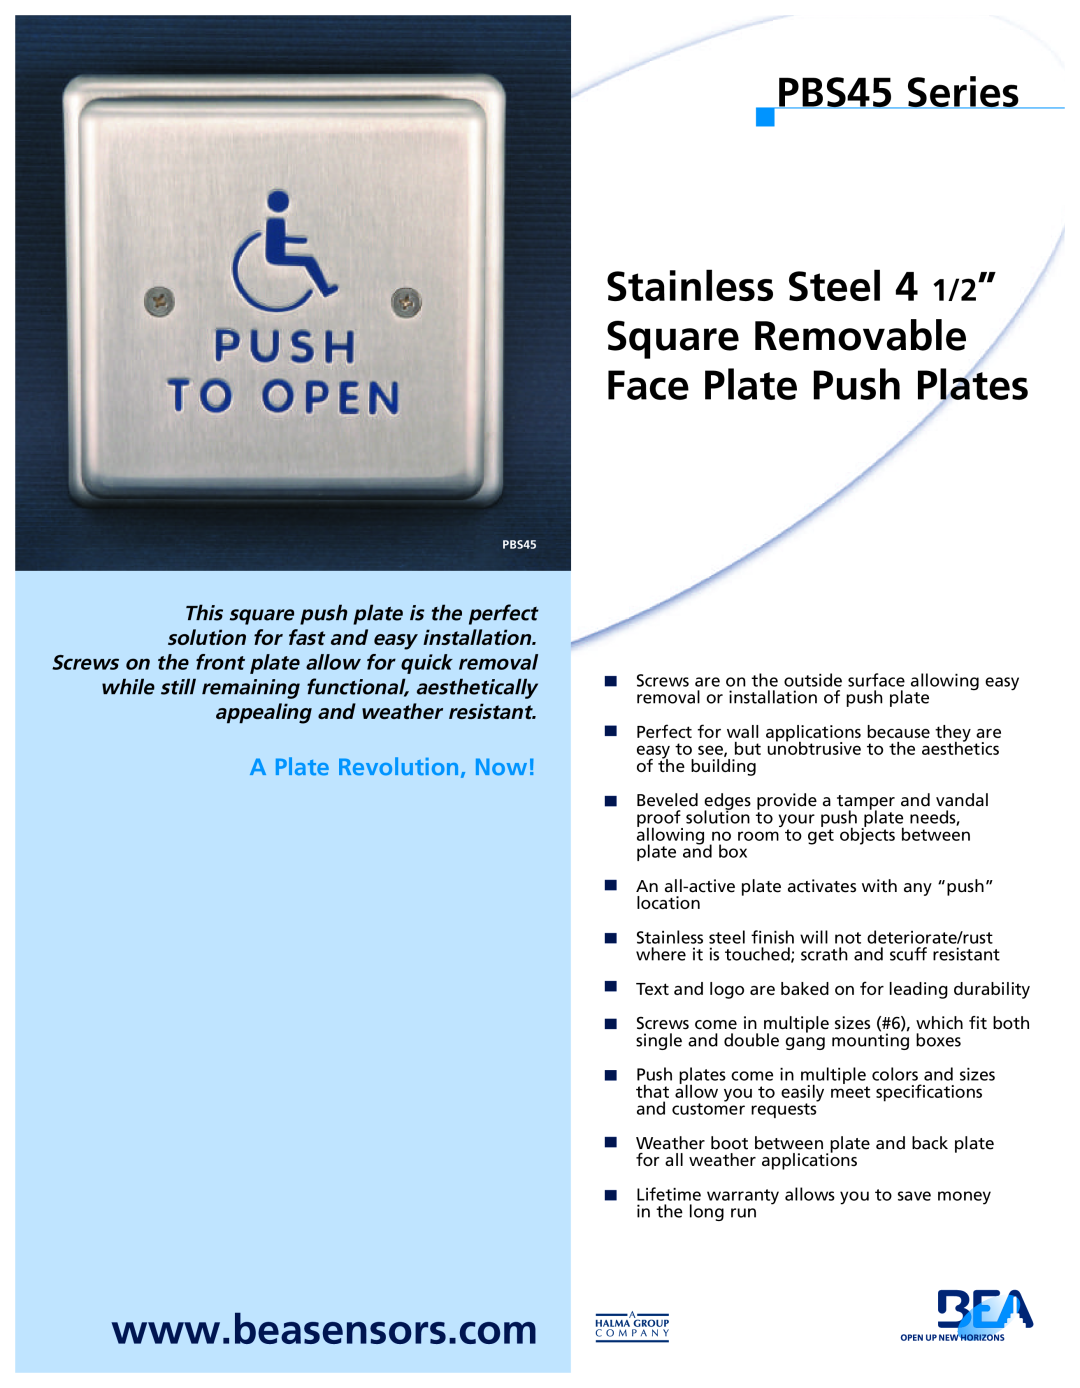 BEA specifications PBS45 Series Stainless Steel 4 1/2” Square Removable, Face Plate Push Plates 